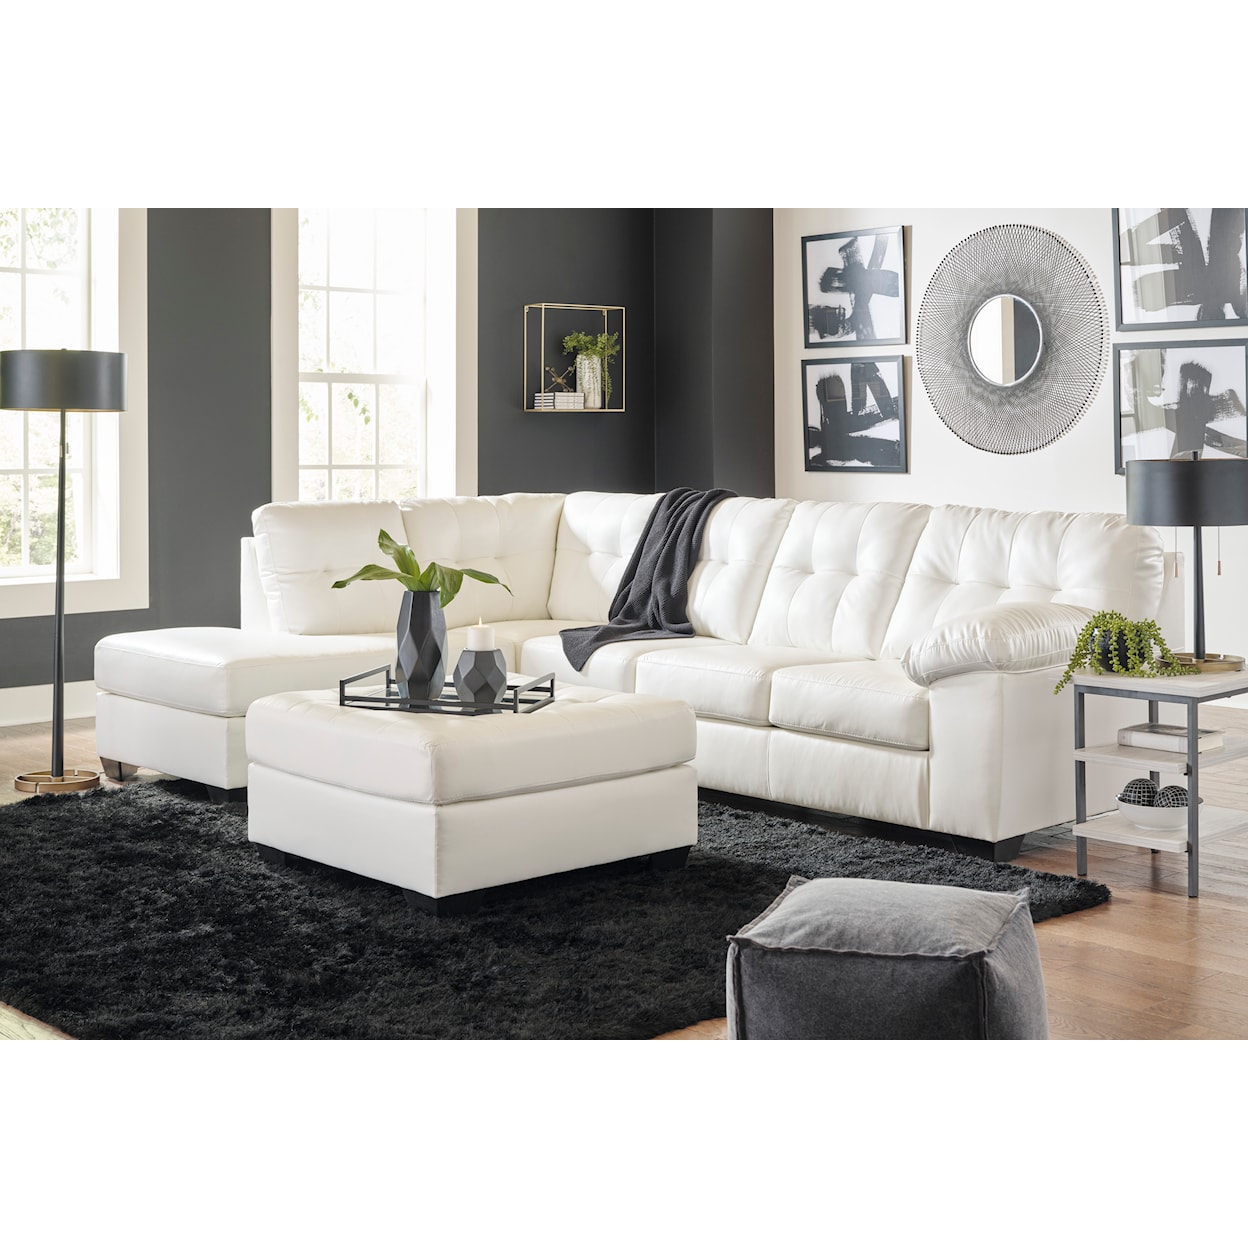 Ashley Furniture Signature Design Donlen 2-Piece Sectional with Chaise